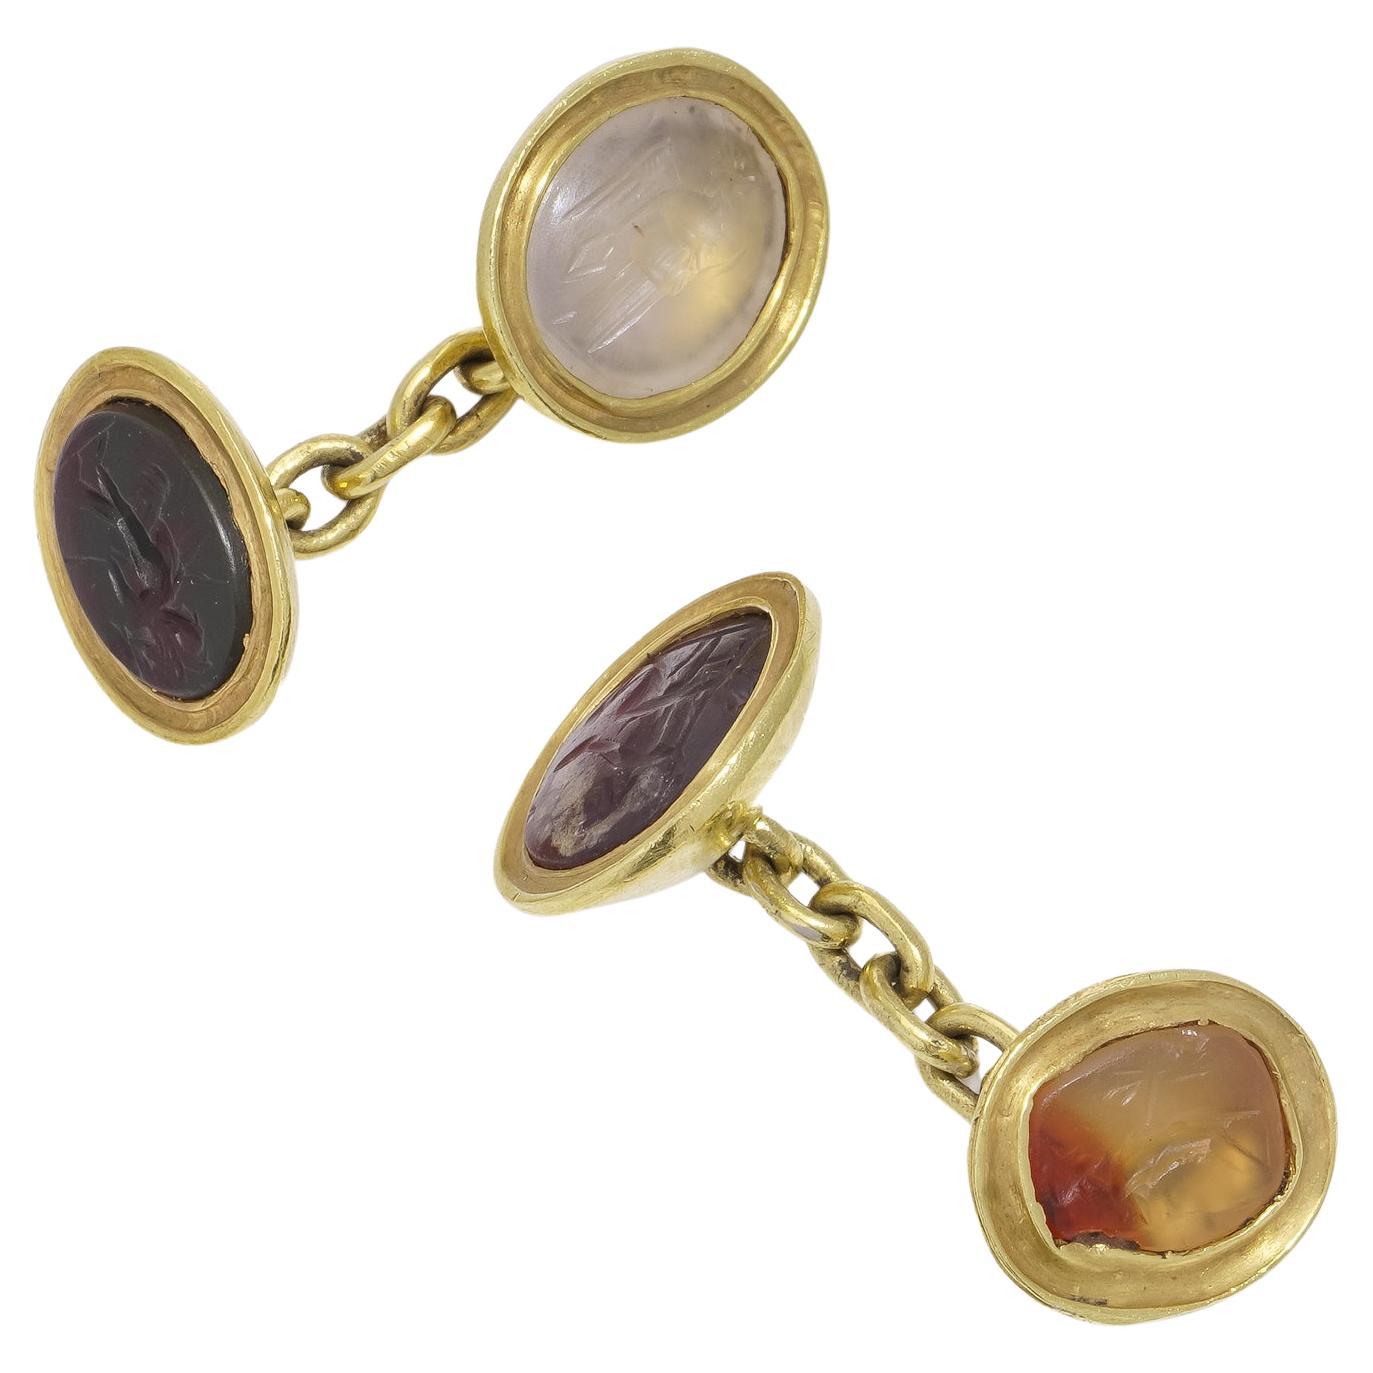 Antique 22kt yellow gold cufflinks, each adorned with Roman 4 carved hardstone For Sale